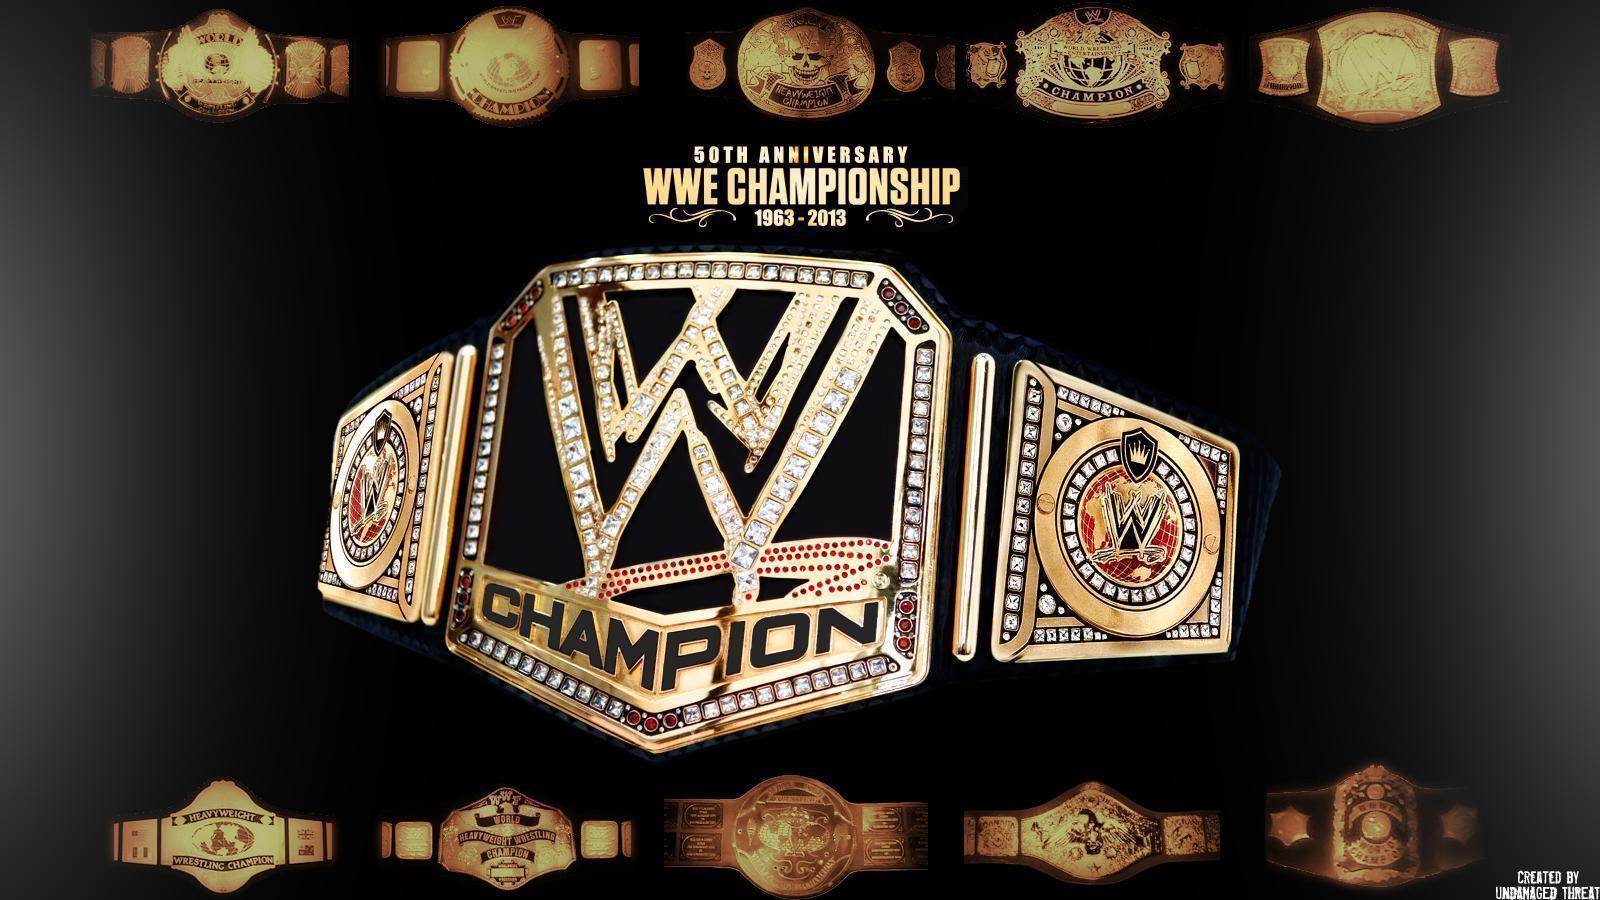 WWE Championship 50th Anniversary Wallpapers created by Undamaged